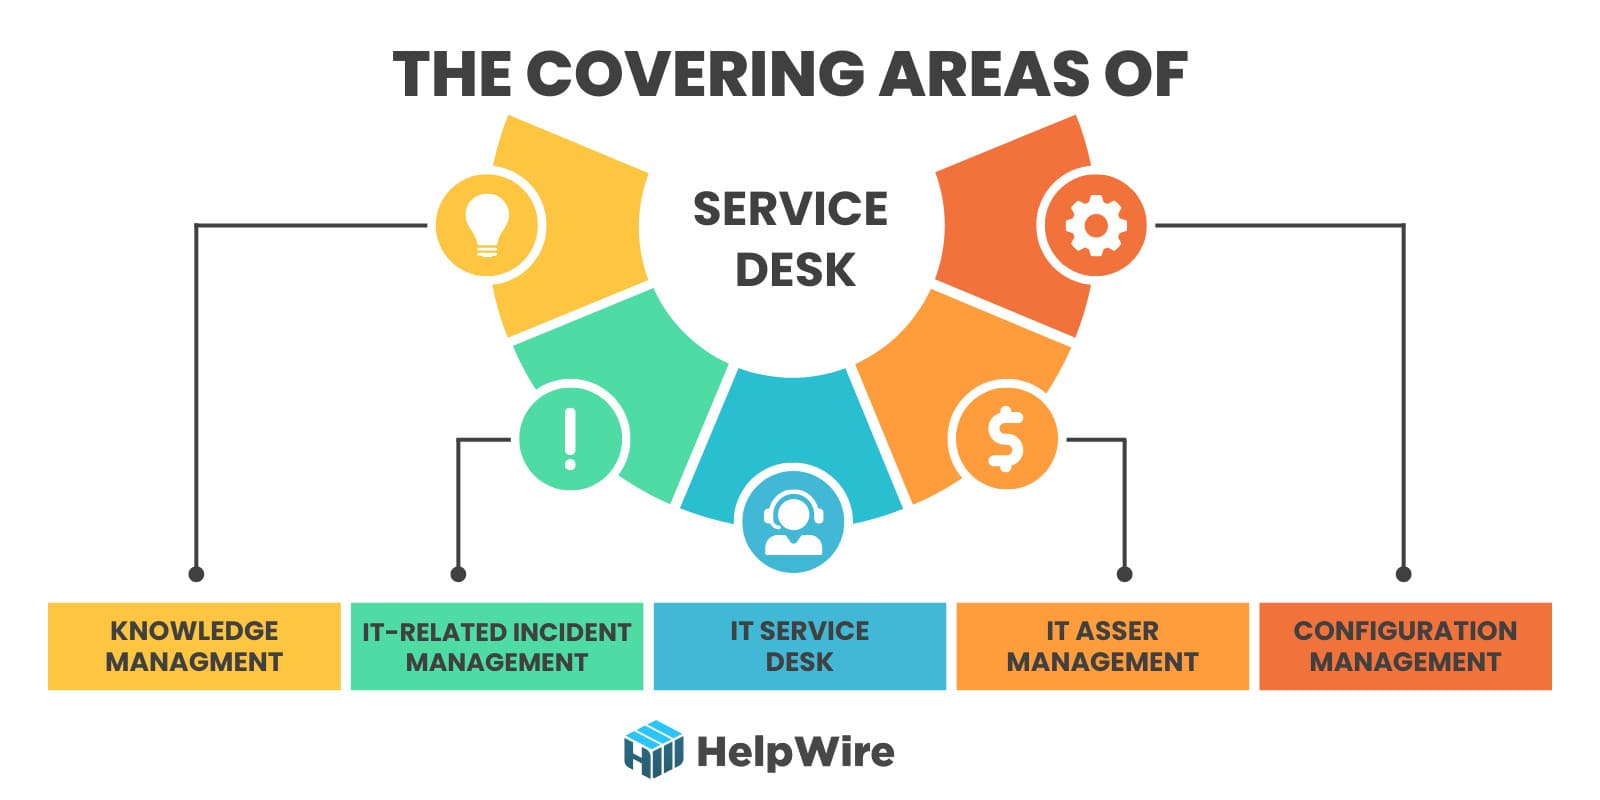 what is service desk